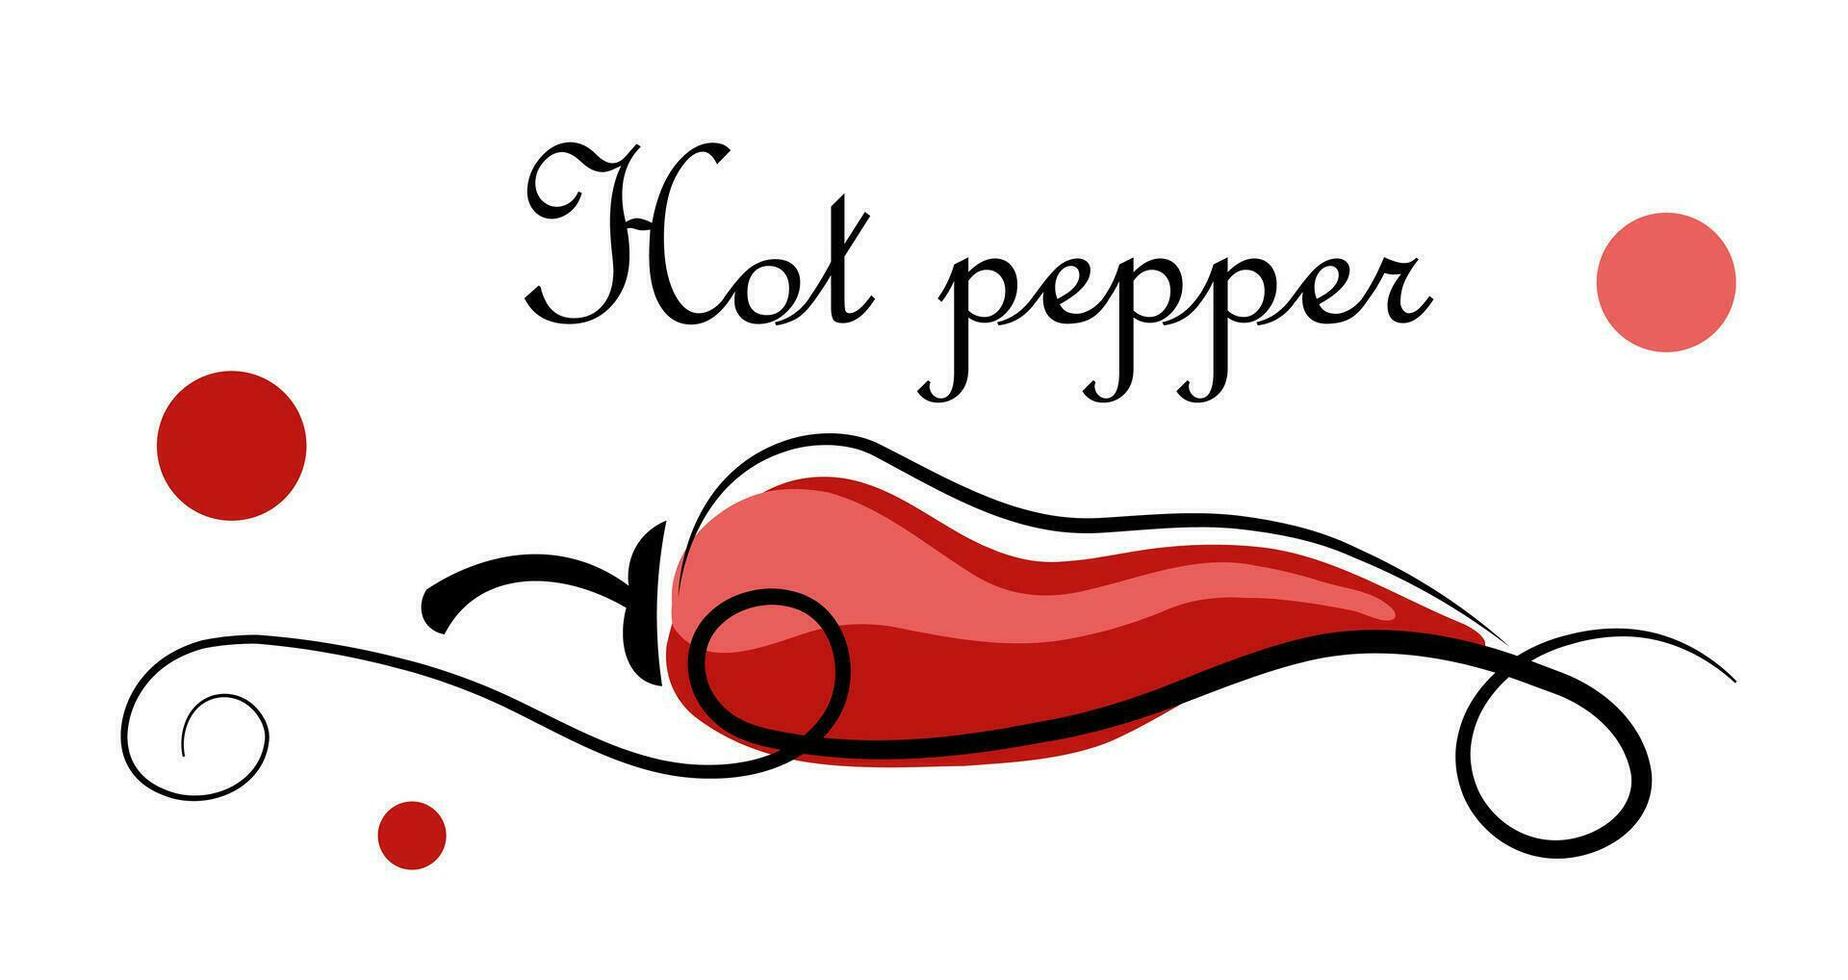 Red, hot pepper on white background. Doodle vector